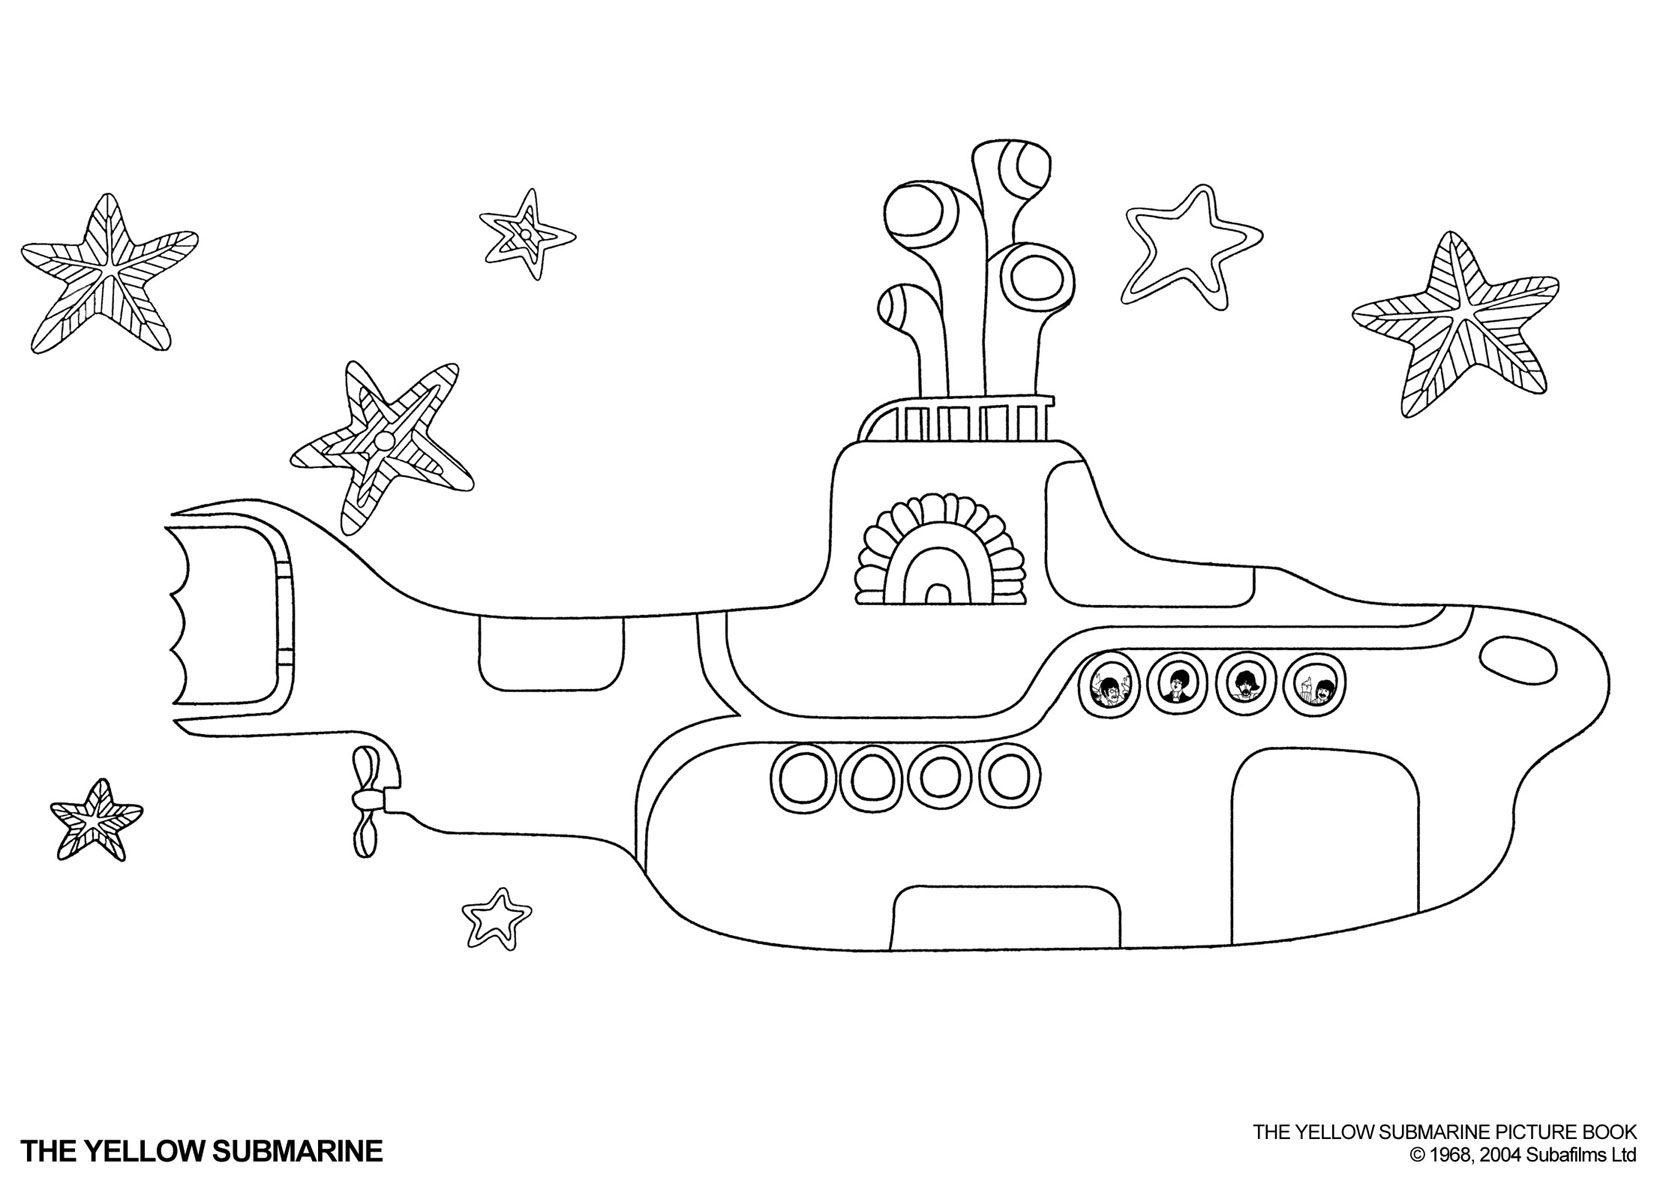  Submarine Coloring pages | kids coloring pages | Coloring pages for kids | #20